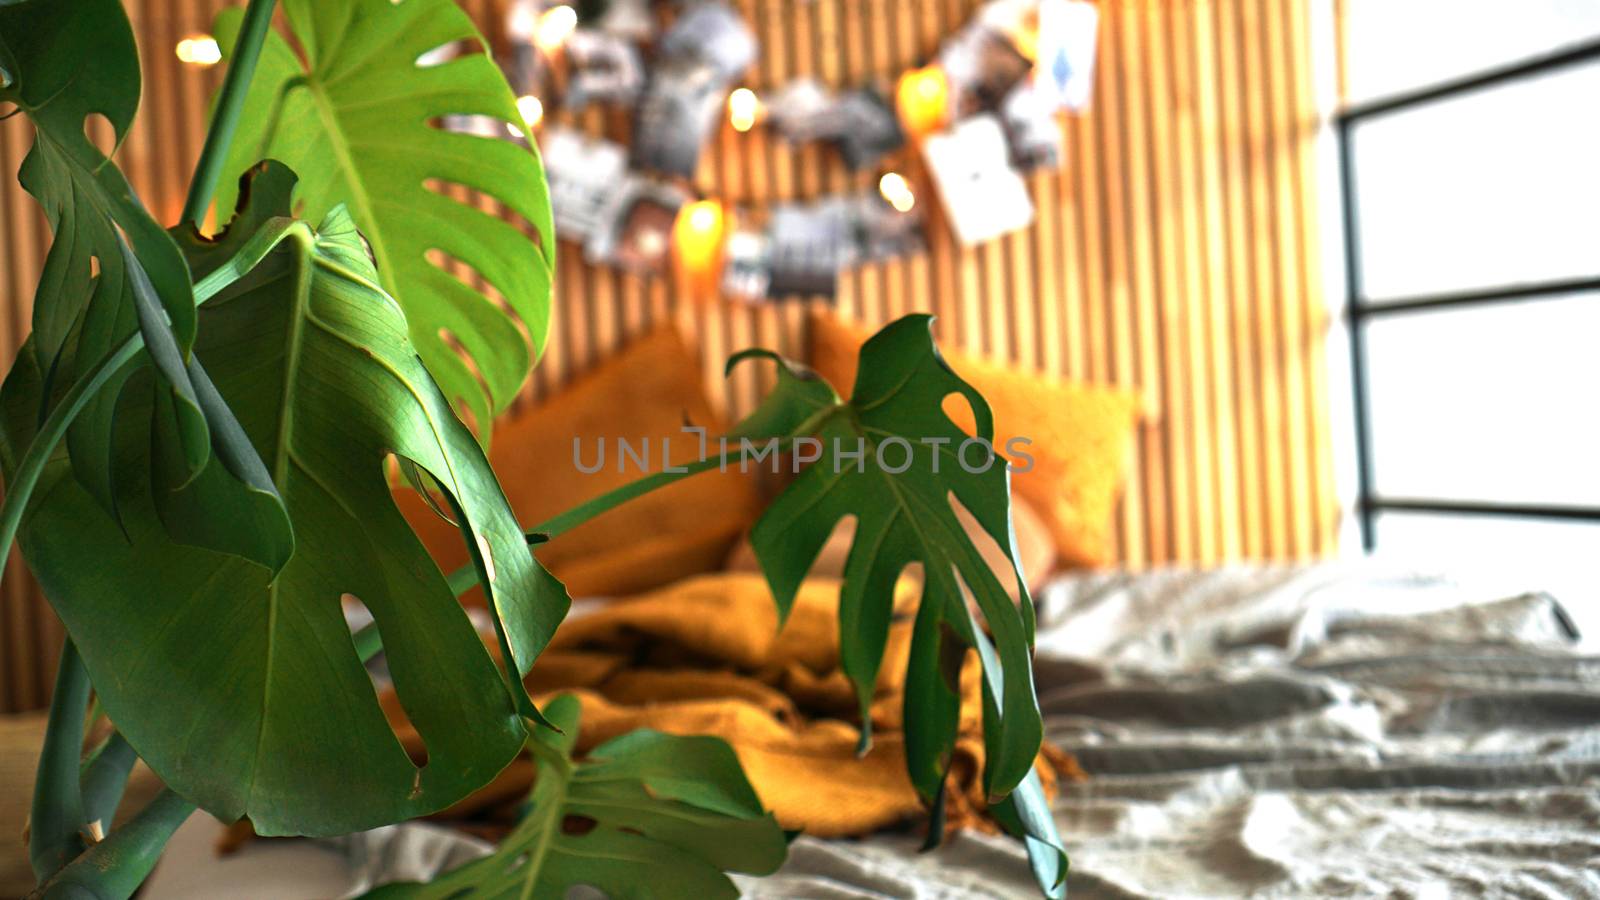 Cozy room. Home plant in focus. Blurred background - wooden wall with lights and photos above the bed.